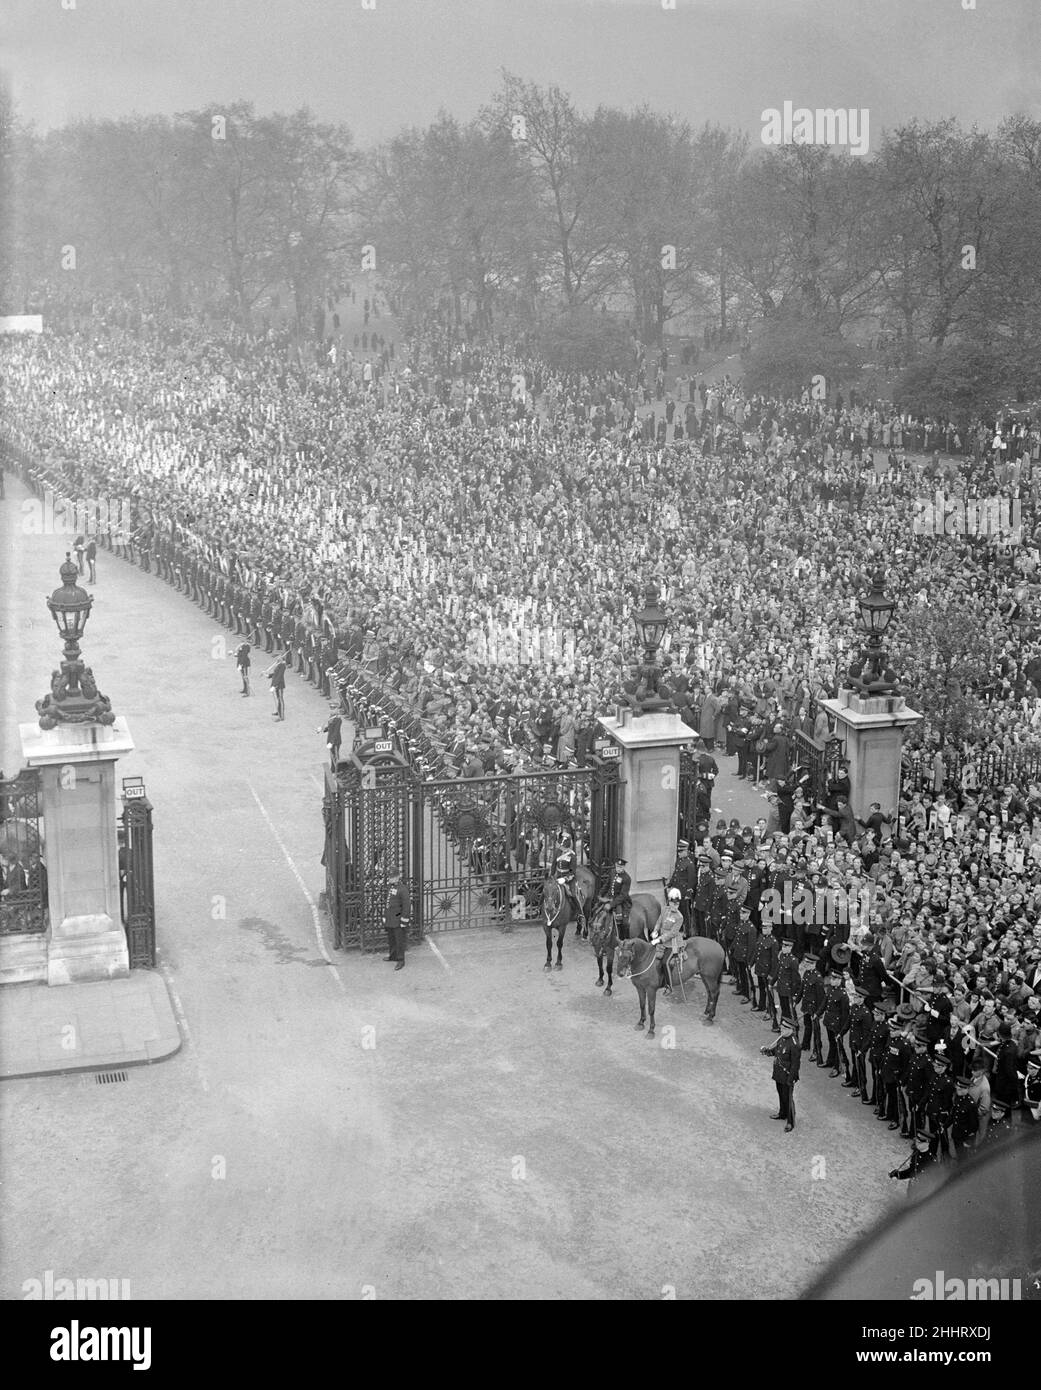 Coronation of King George VI.Crowds await the golden state coach containing King George VI at Cumberland Gate in Hyde Park on its return journey to Buckingham Palace. 12th May 1937. Stock Photo